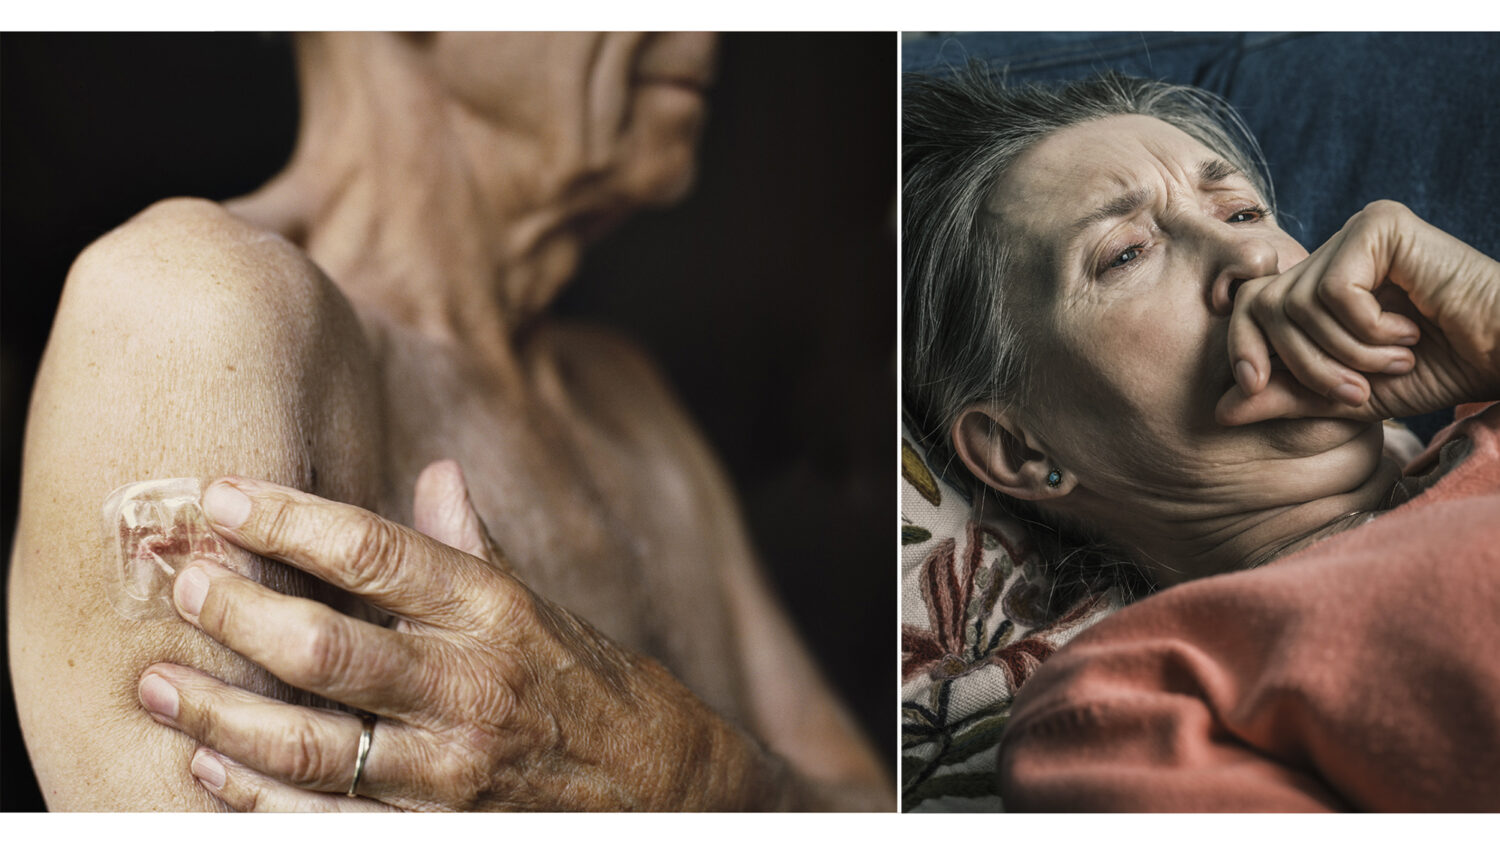 Senior healthcare photography campaigns by Colin Hawkins